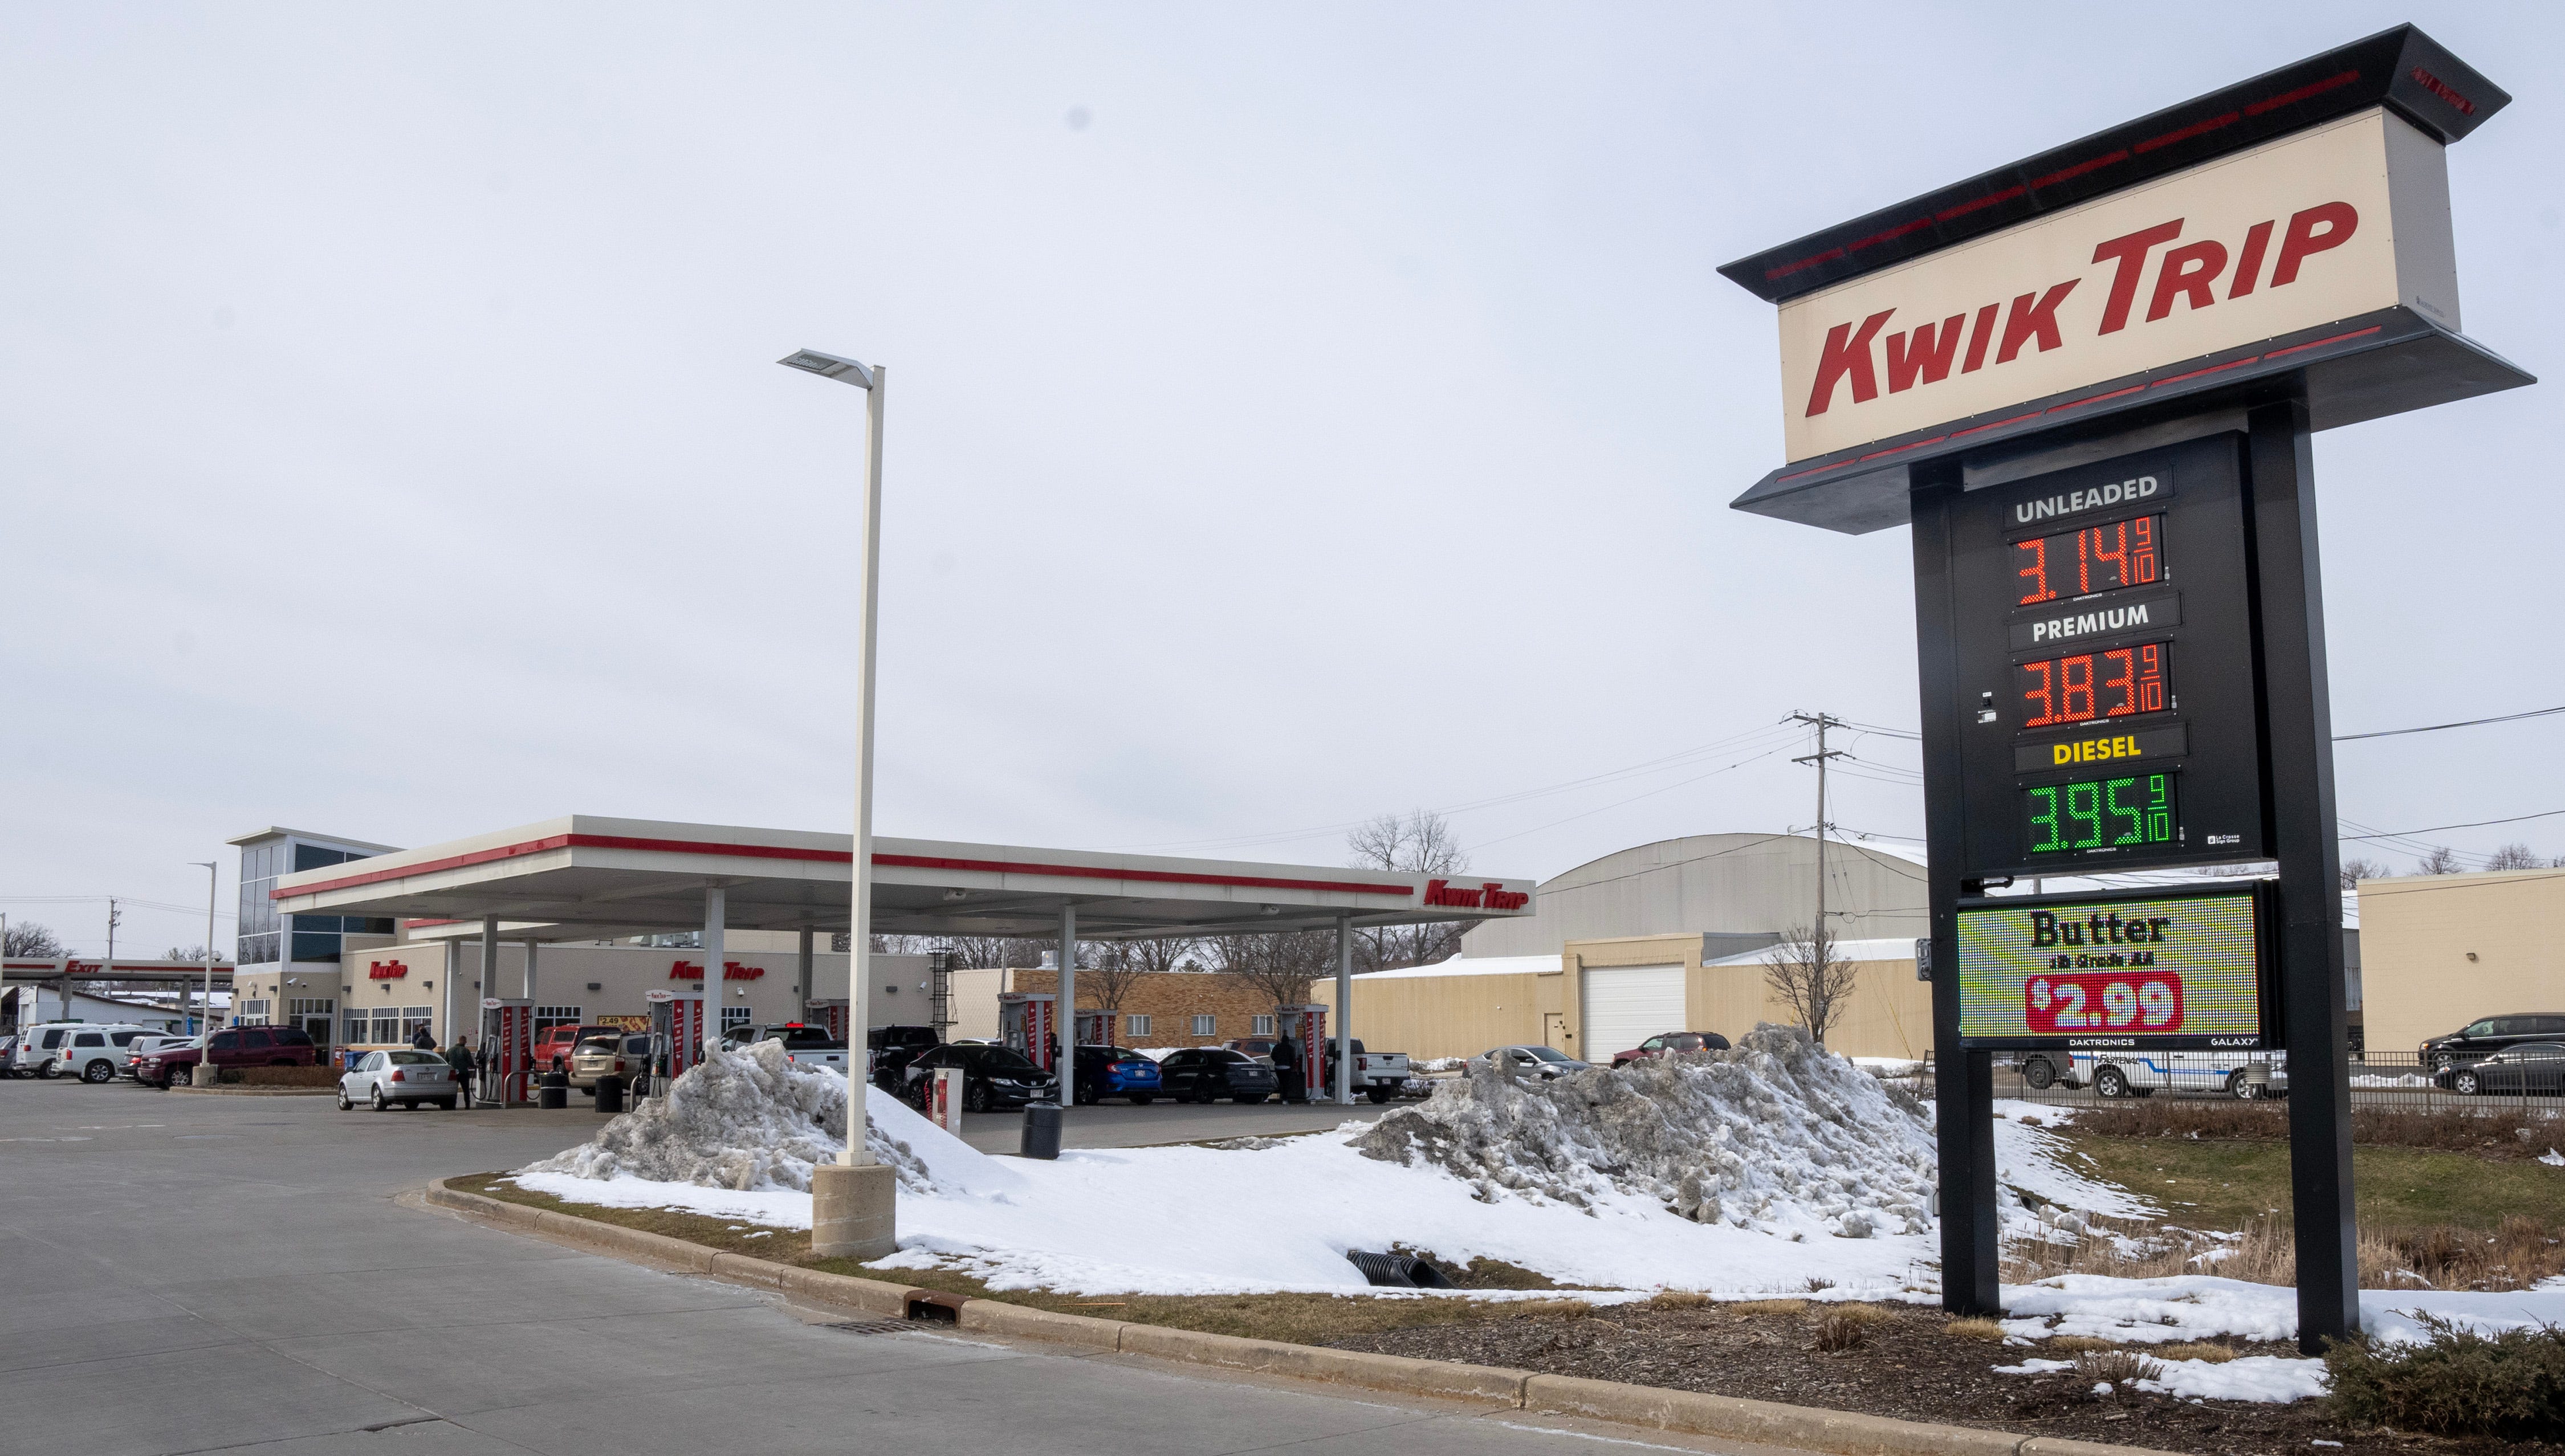 The Kwik Trip at 12501 W. Arden Place in Butler, Wis., where an officer tried to pull over a car driven by Bobbie Lou Schoeffling. Facial recognition software identified Nicholas Howell as her passenger.